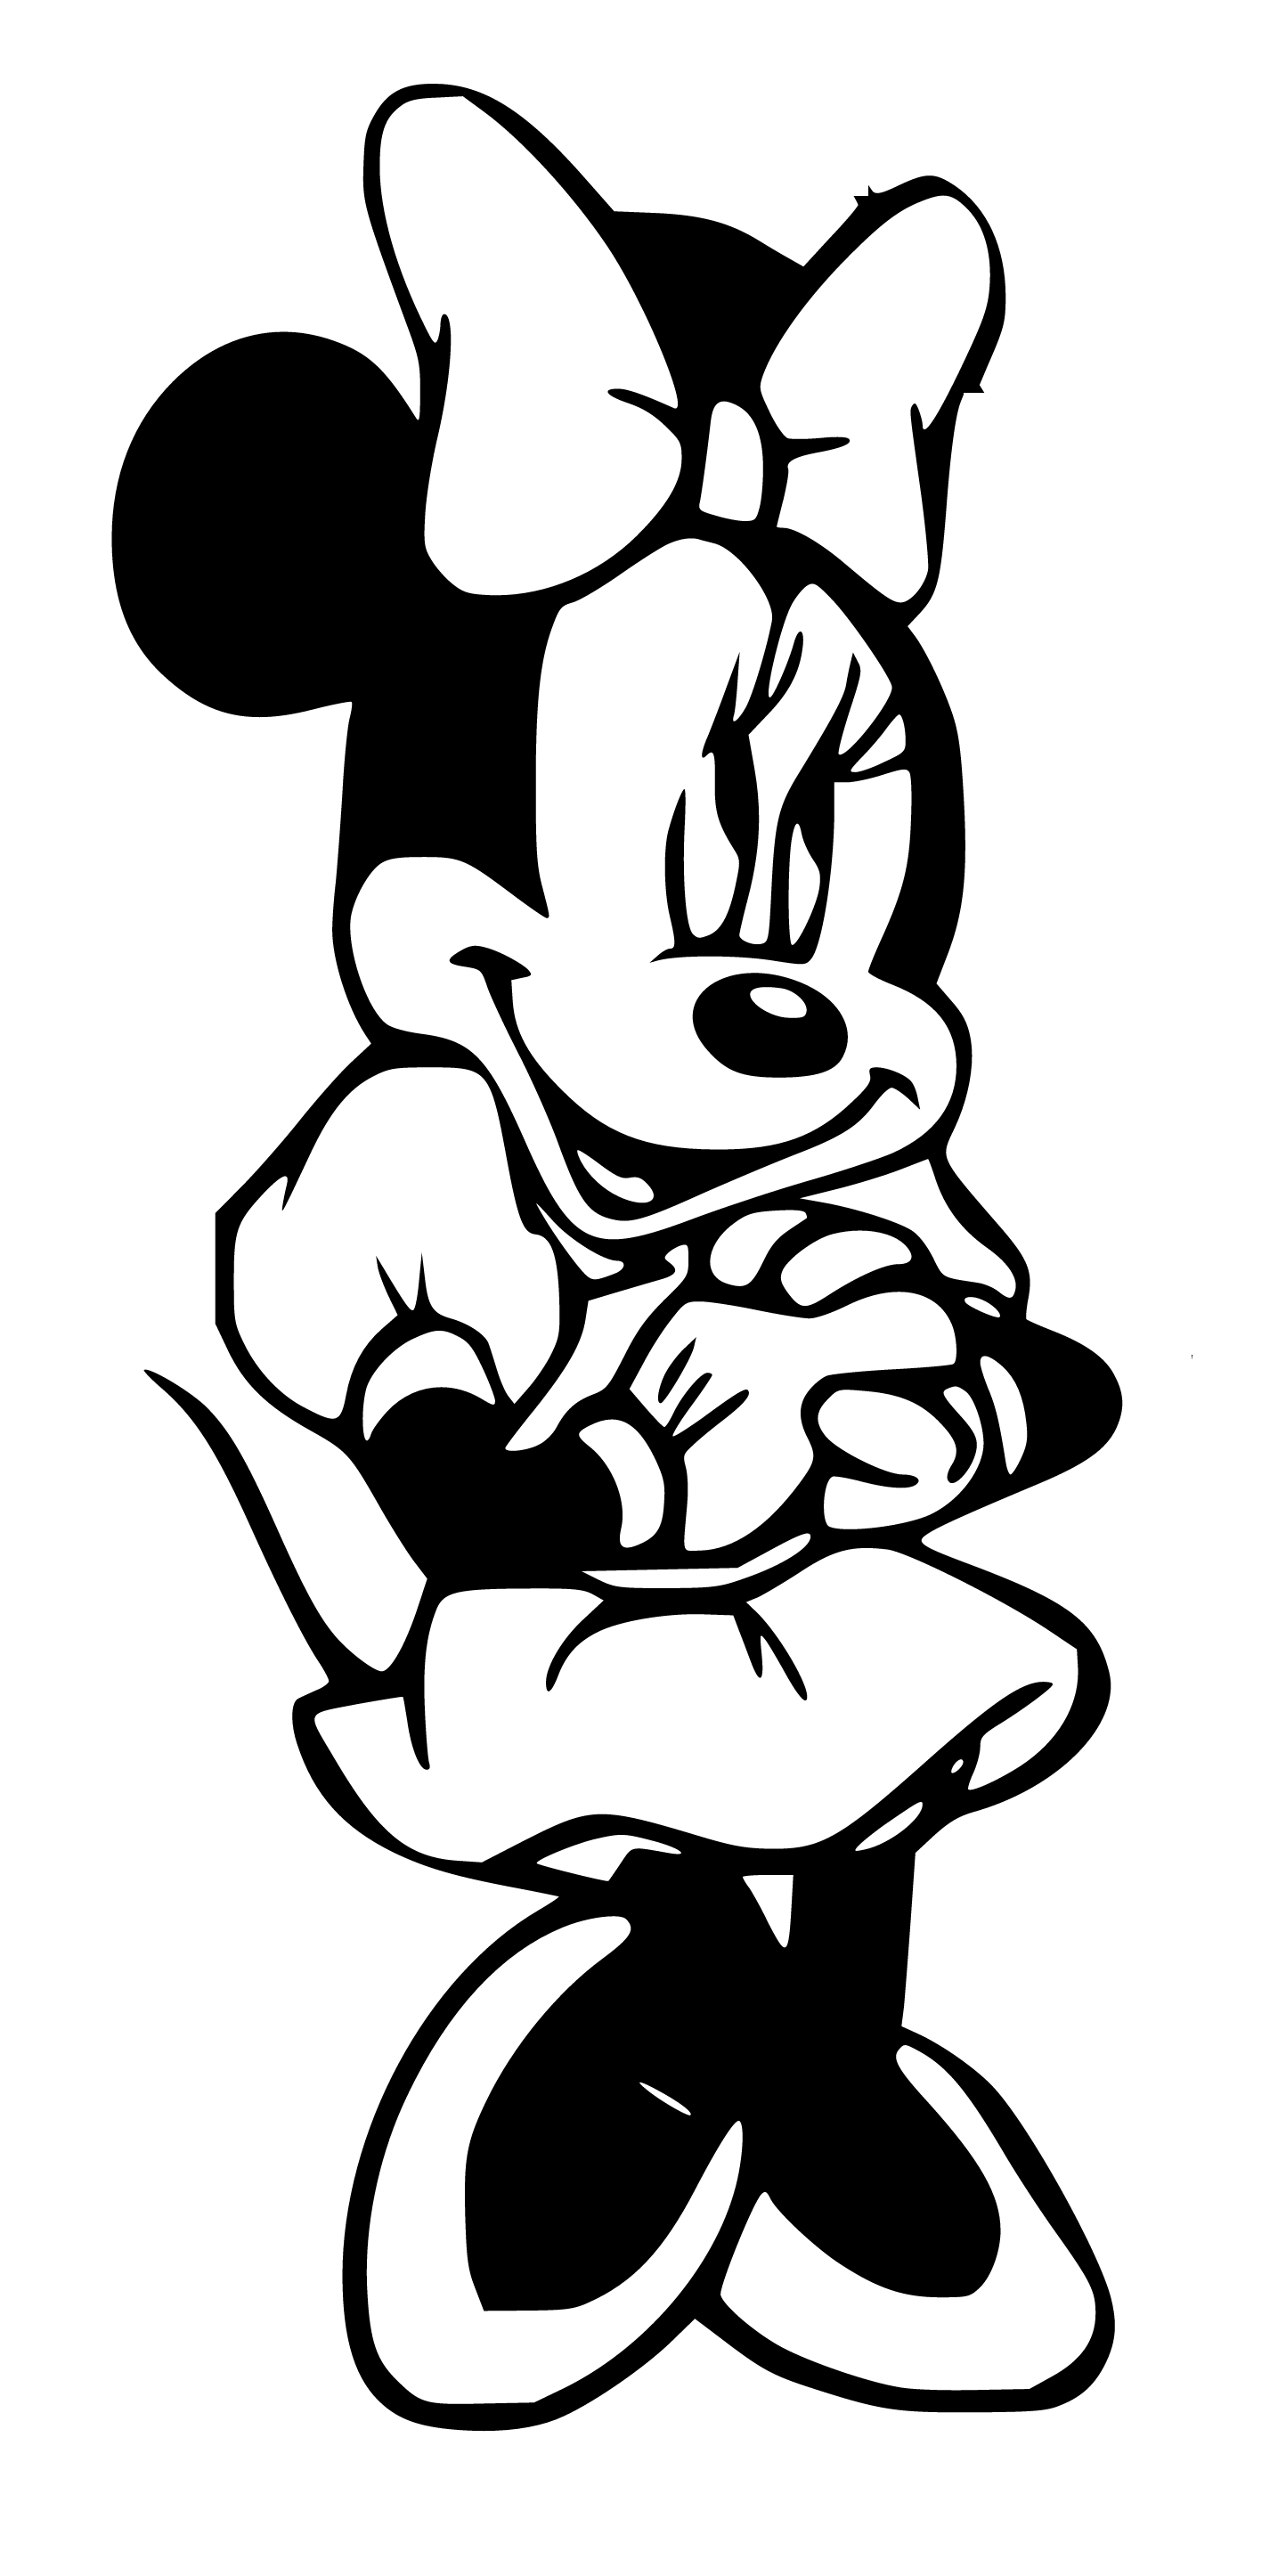 Minnie Mouse Feeling Shy Coloring Page for Kids - SheetalColor.com